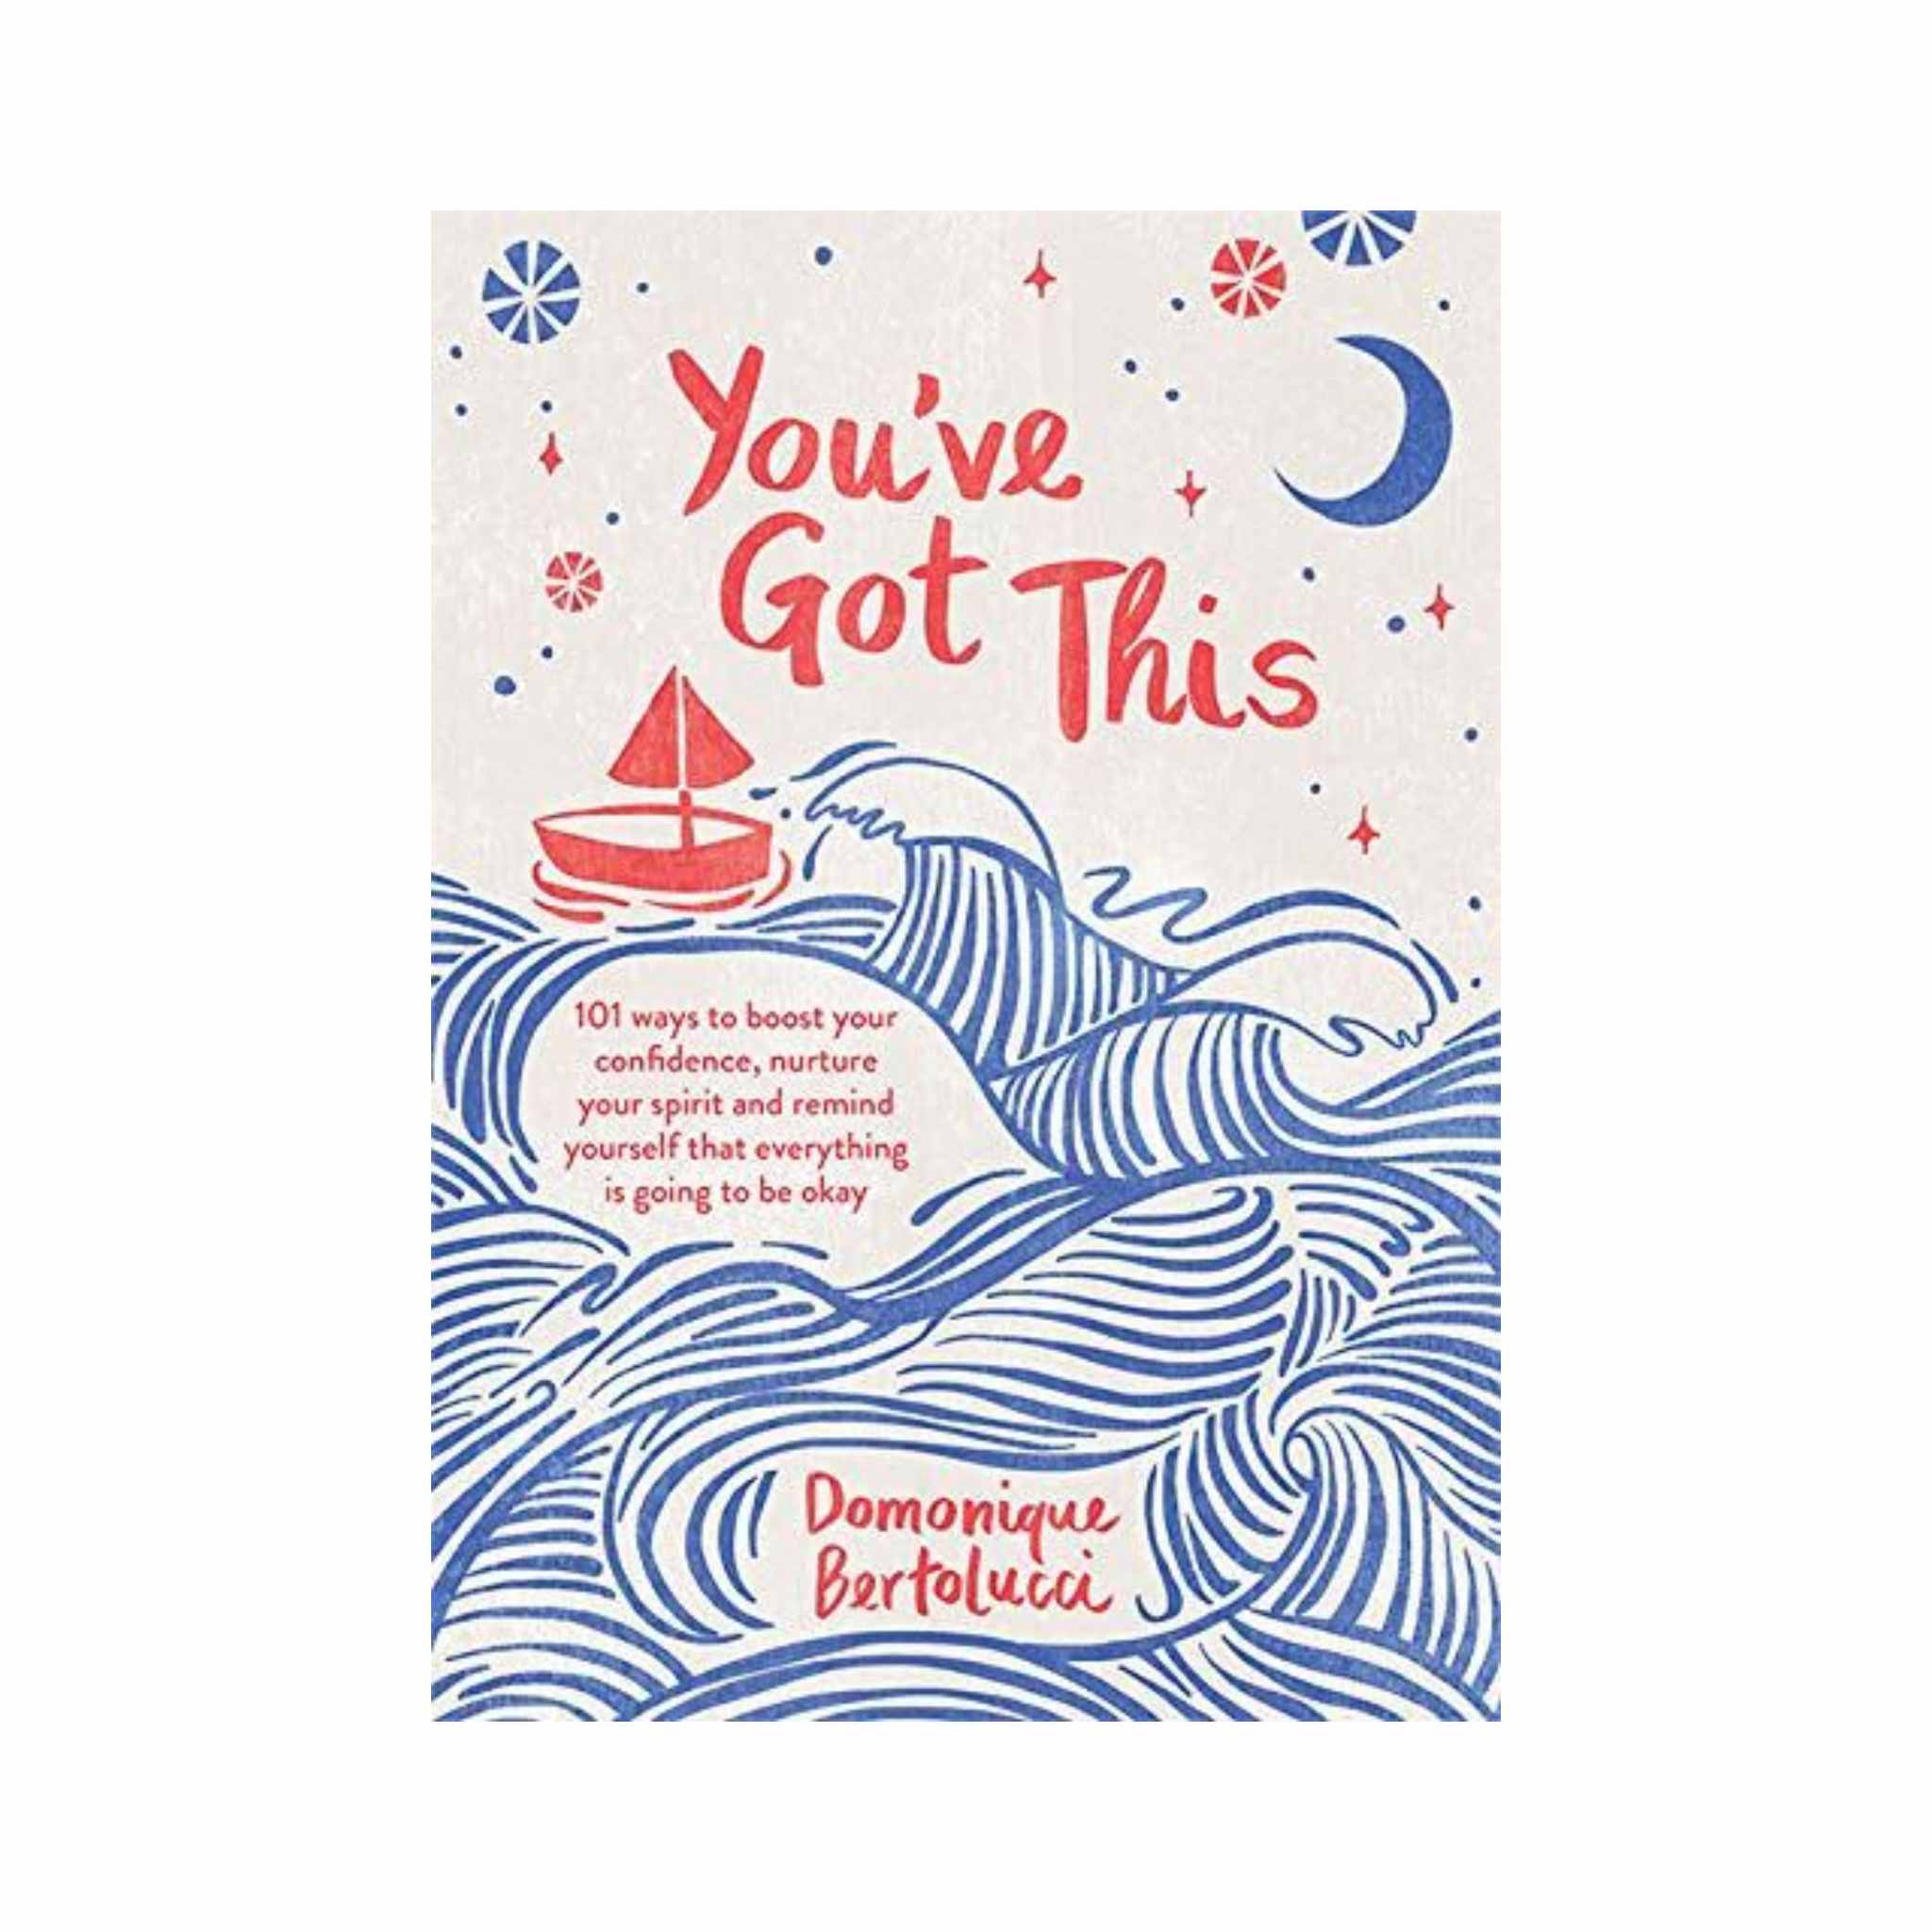 You've Got This Book